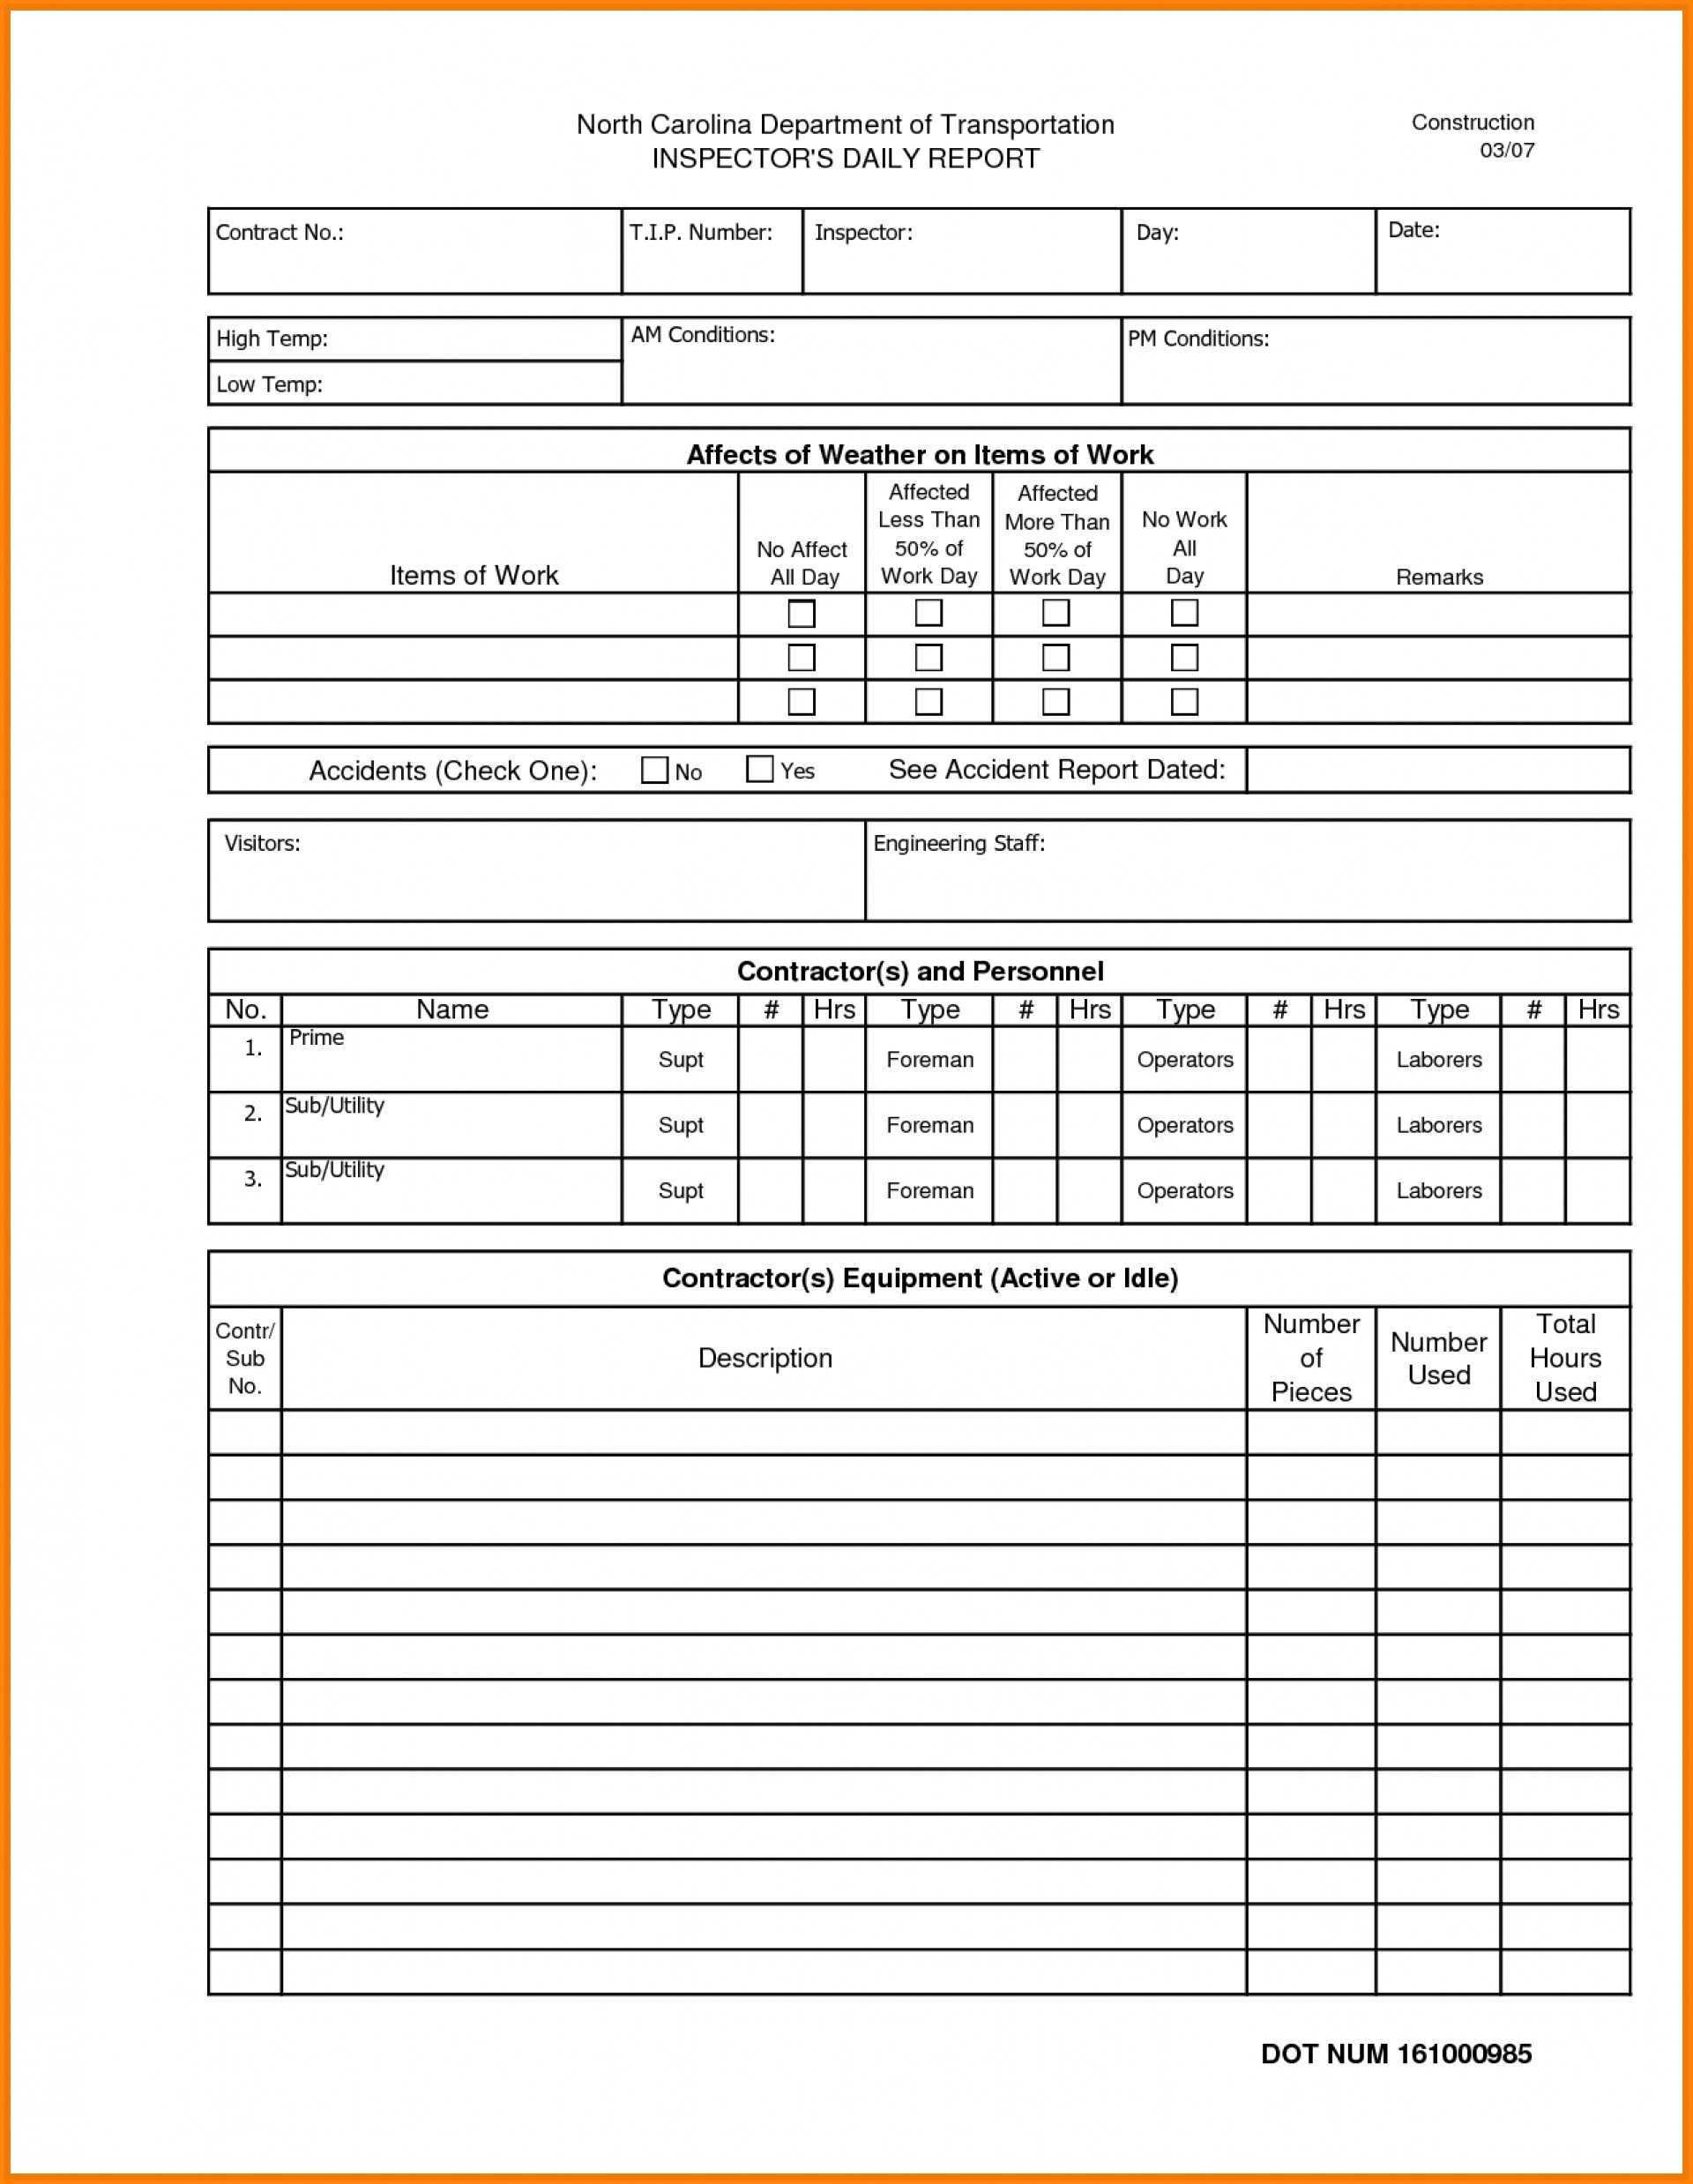 10 Project Progress Reports Templates | Business Letter With Progress Report Template For Construction Project